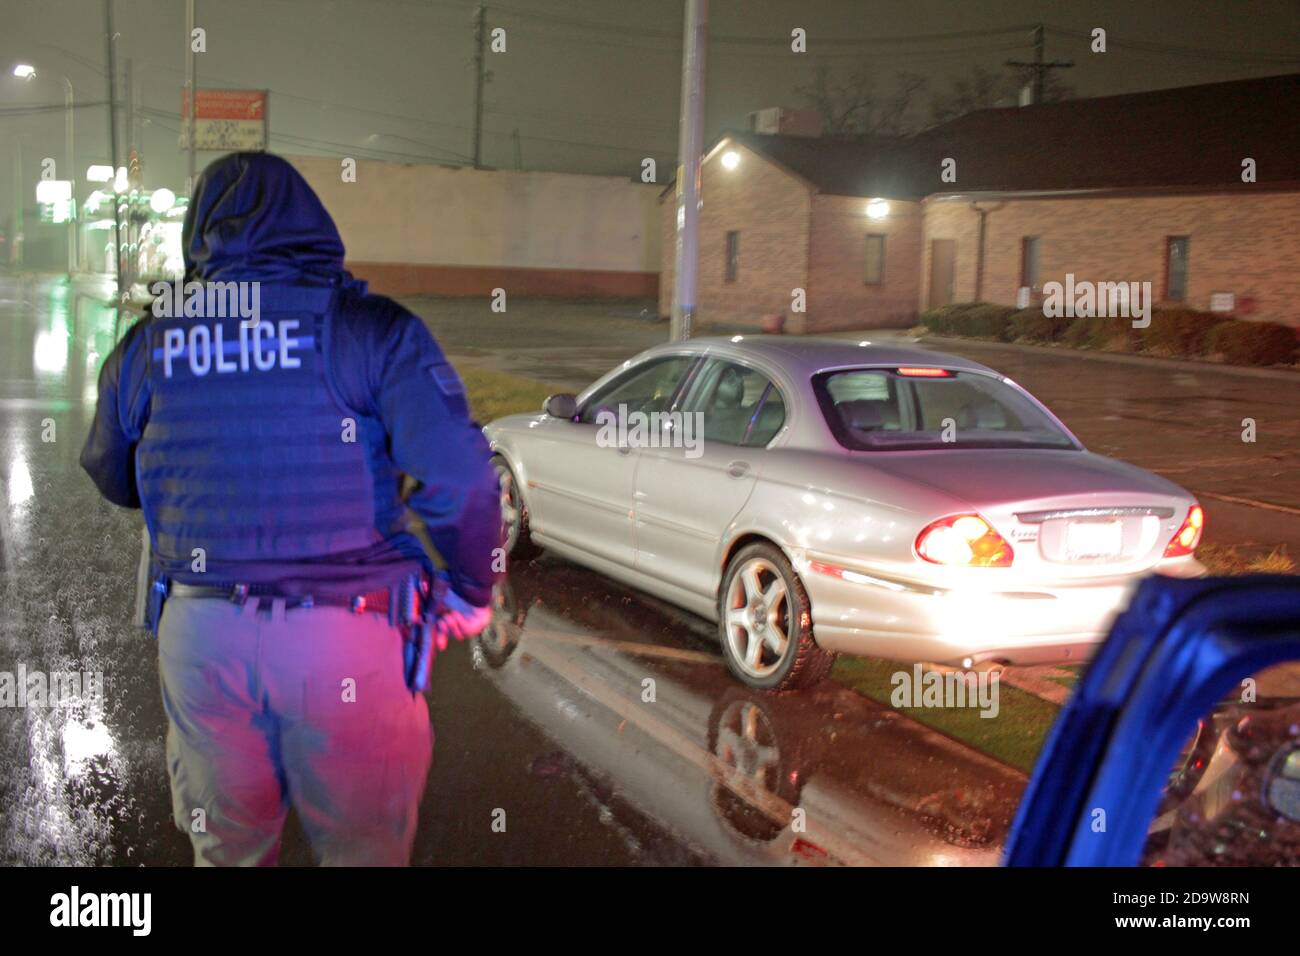 A Detroit police officer appraoches a car on a rainy night in Detroit, Michigan, USA Stock Photo